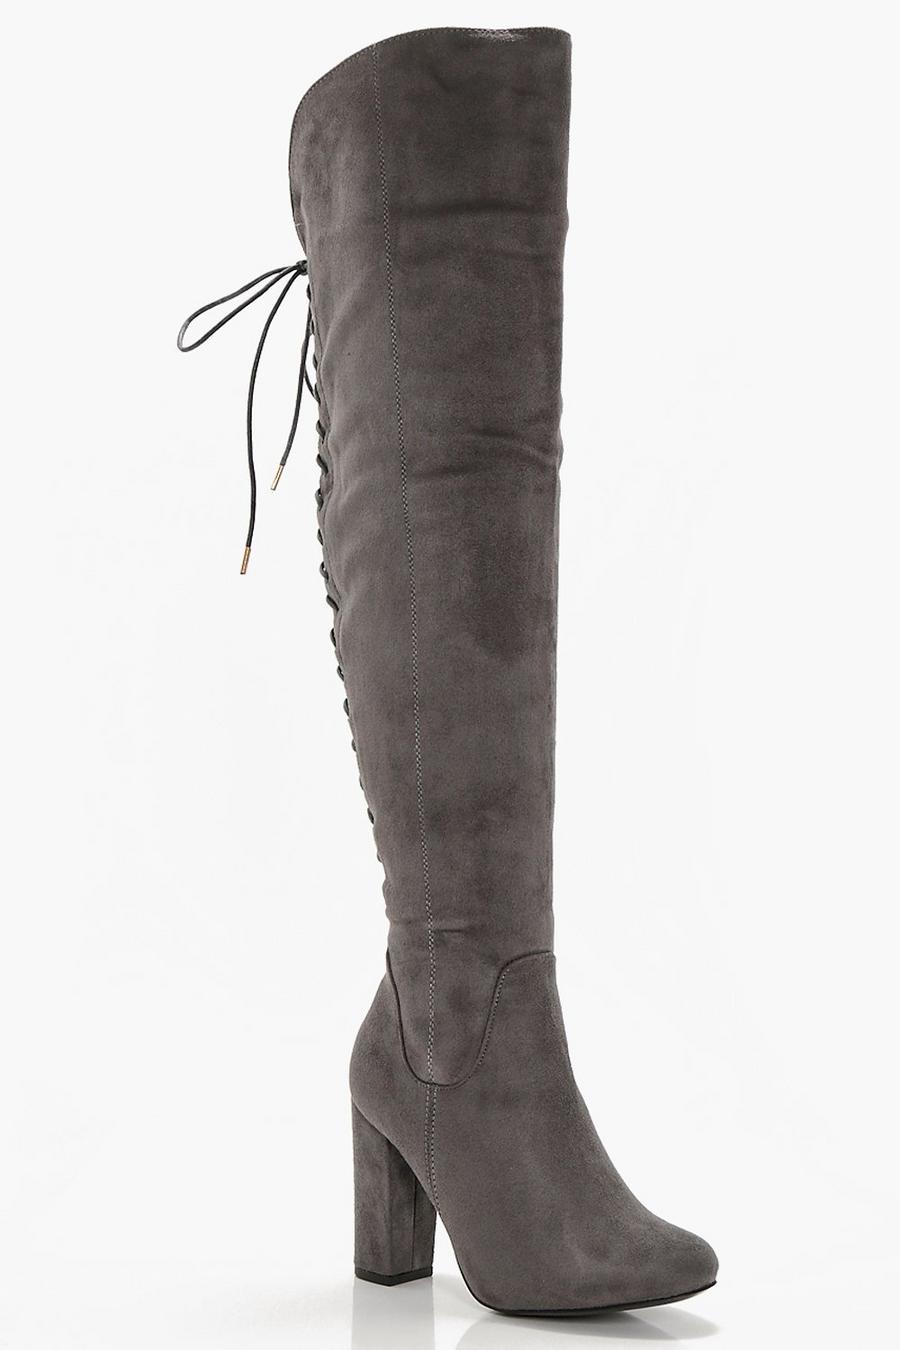 Grey Lace Back Block Heel Over The Knee High Boots